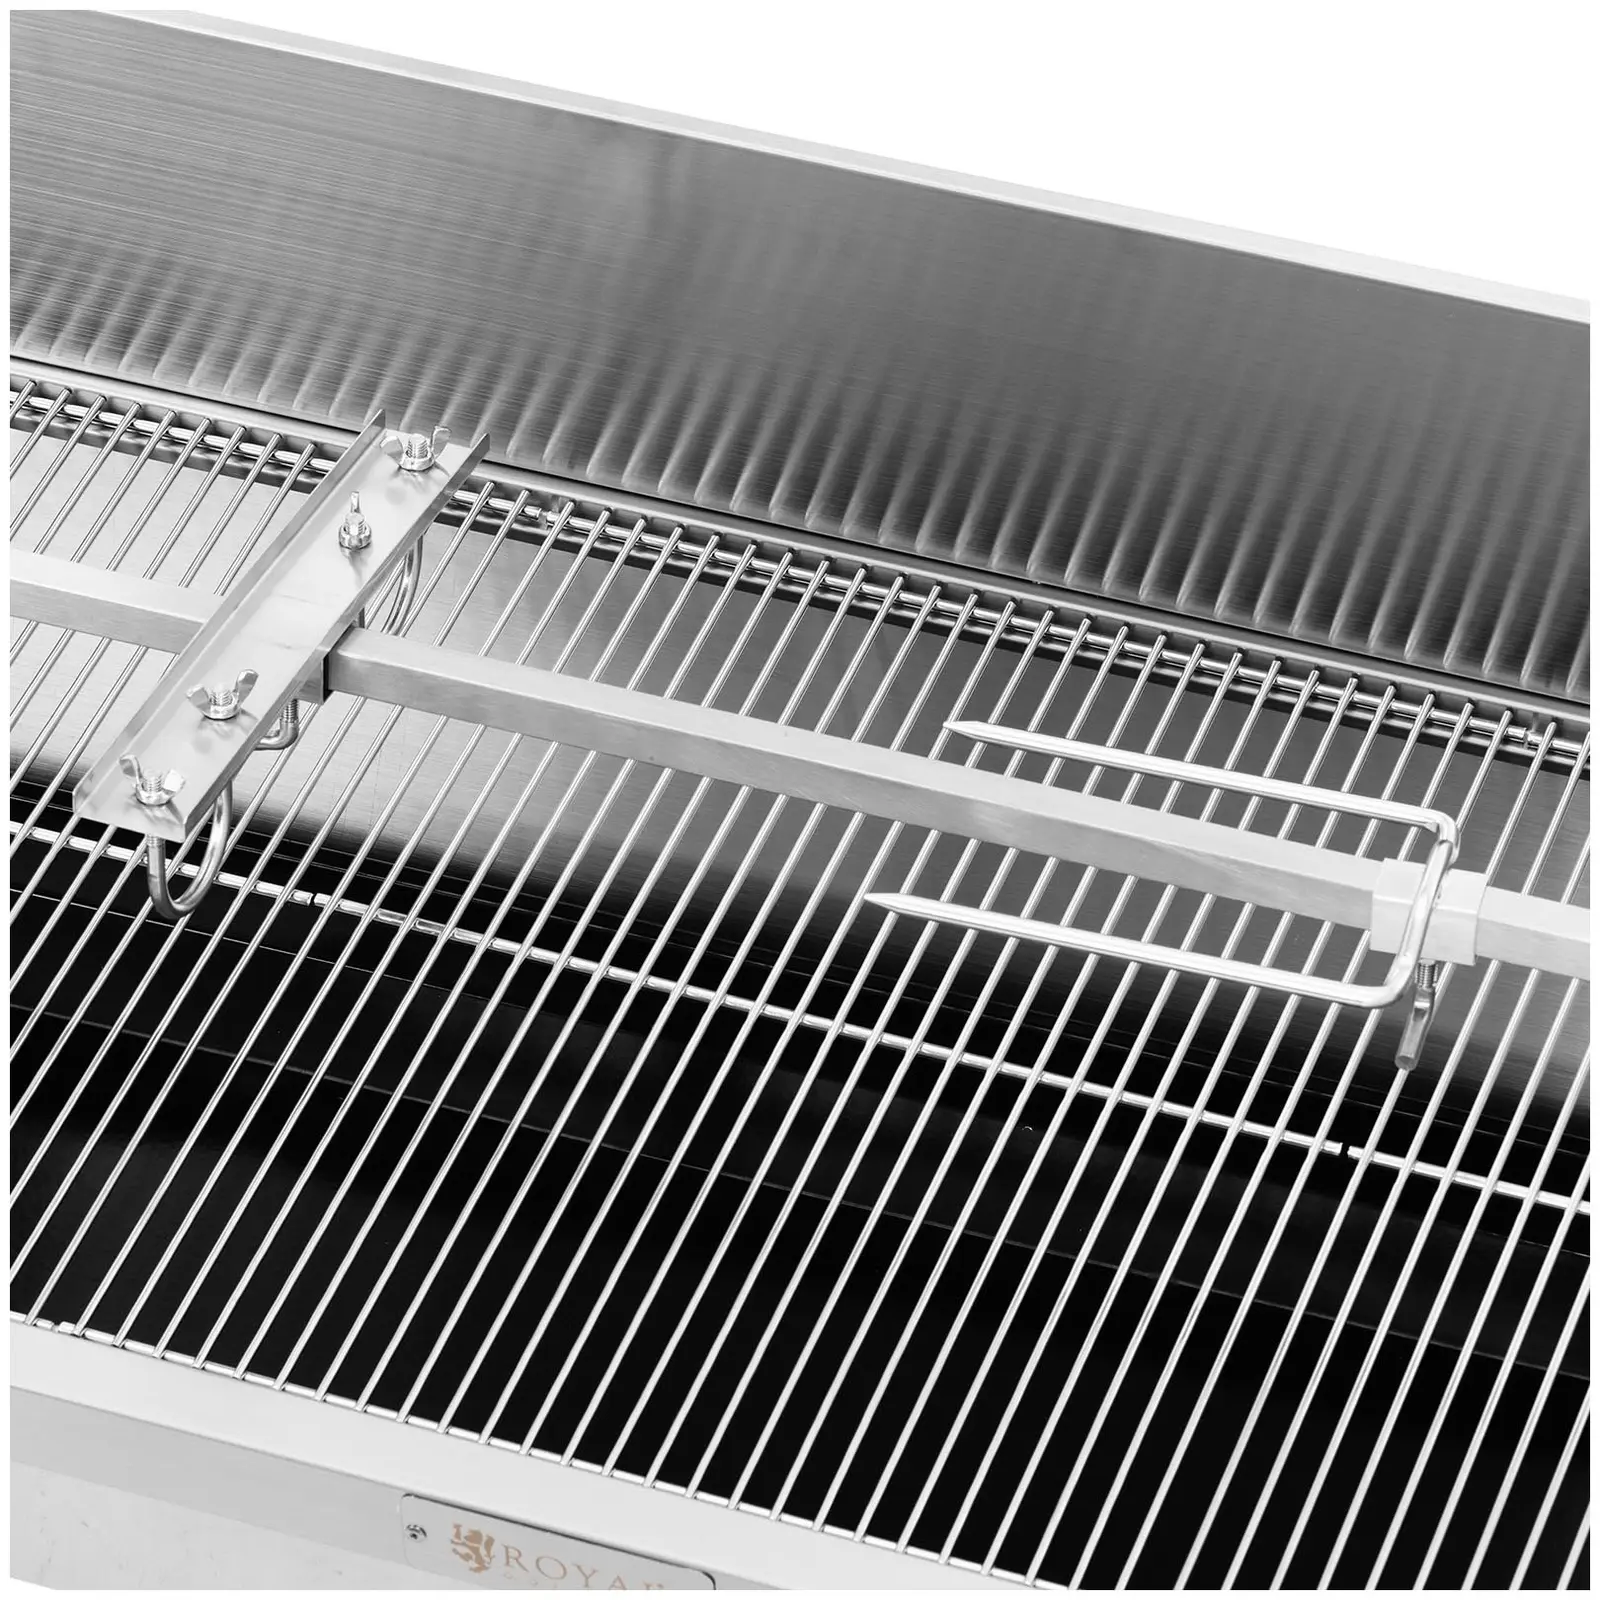 Roasting Spit - with motor - 40 kg - stainless steel - grill spit length: 137137 cm Wind protection